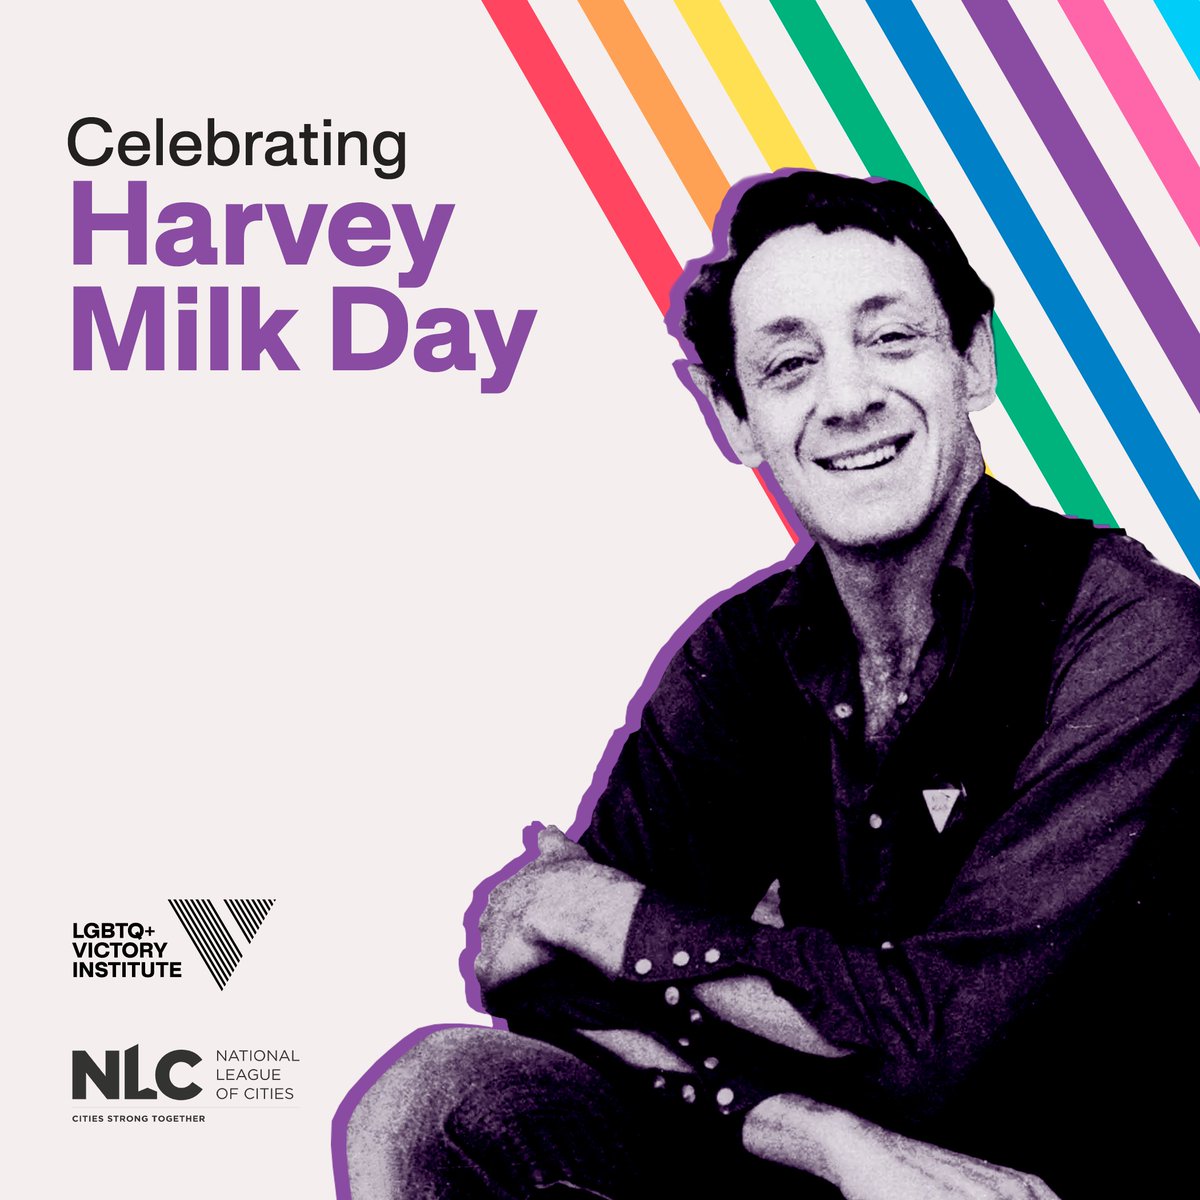 🌈 Harvey Milk Day: “Rights are won only by those who make their voices heard.” Today, LGBTQ+ Victory Institute and the @leagueofcities join forces to honor Milk's legacy, encouraging more LGBTQ+ individuals to pursue public office. victoryinstitute.org/honoring-harve…